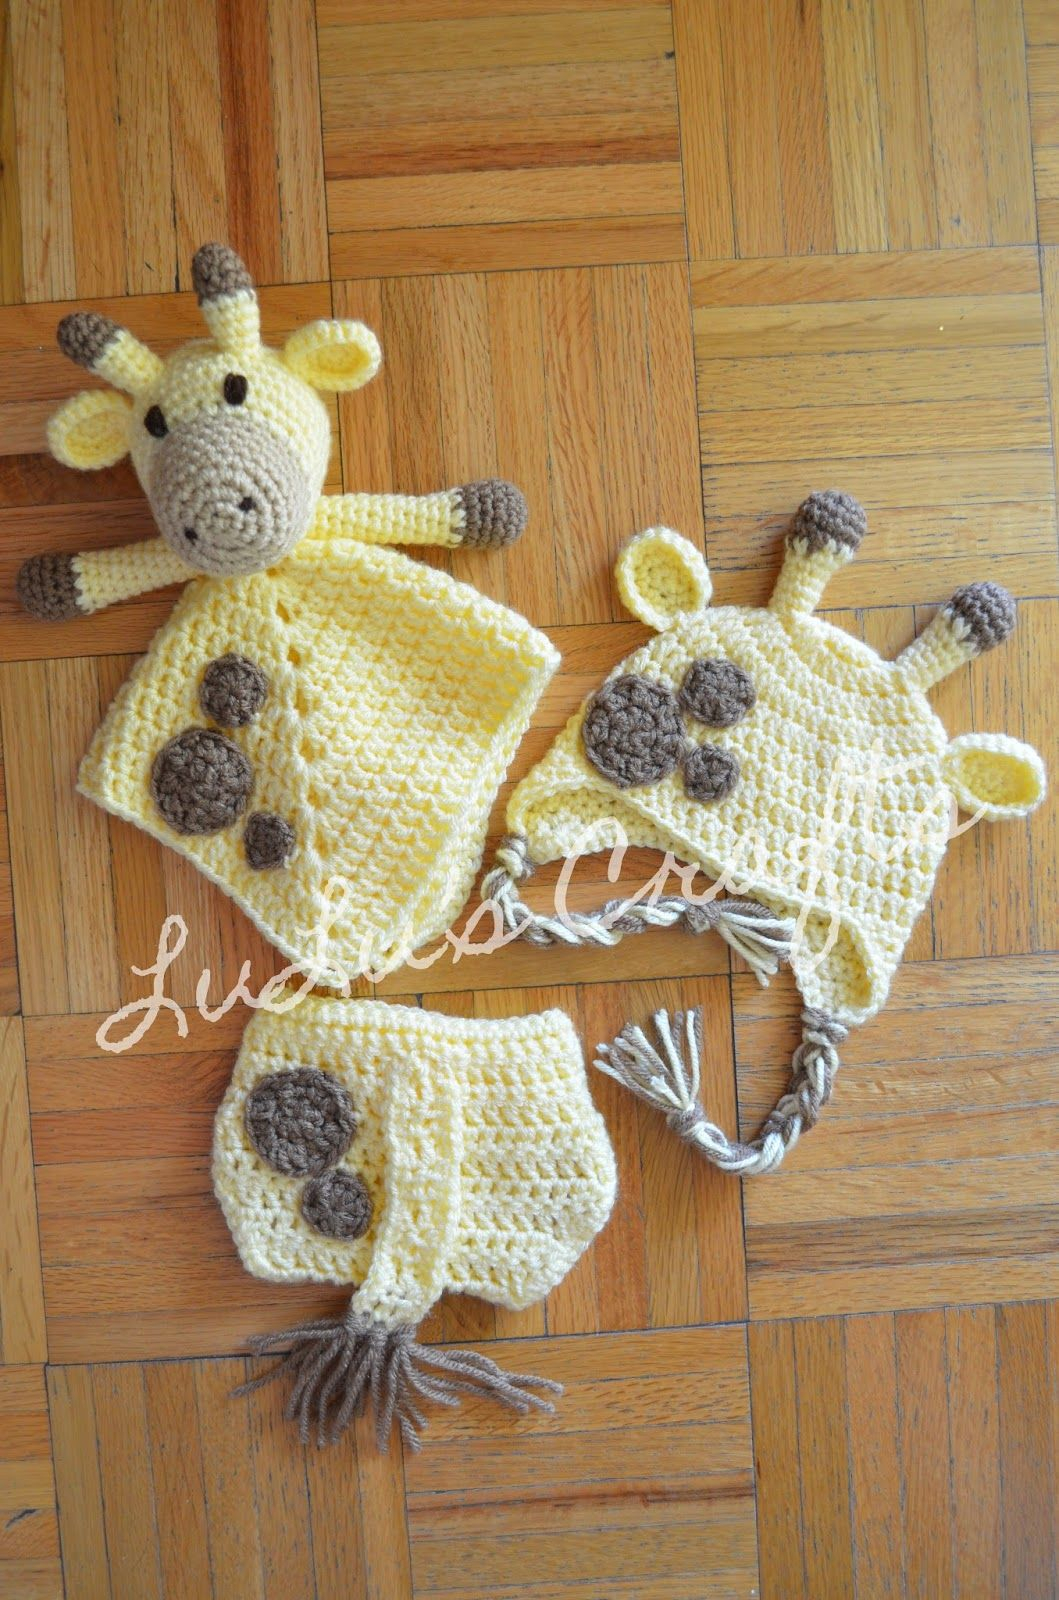 Crochet Baby Hat And Diaper Cover Pattern Free Giraffe Lovey Hat And Diaper Cover Pattern Lulus Crafts